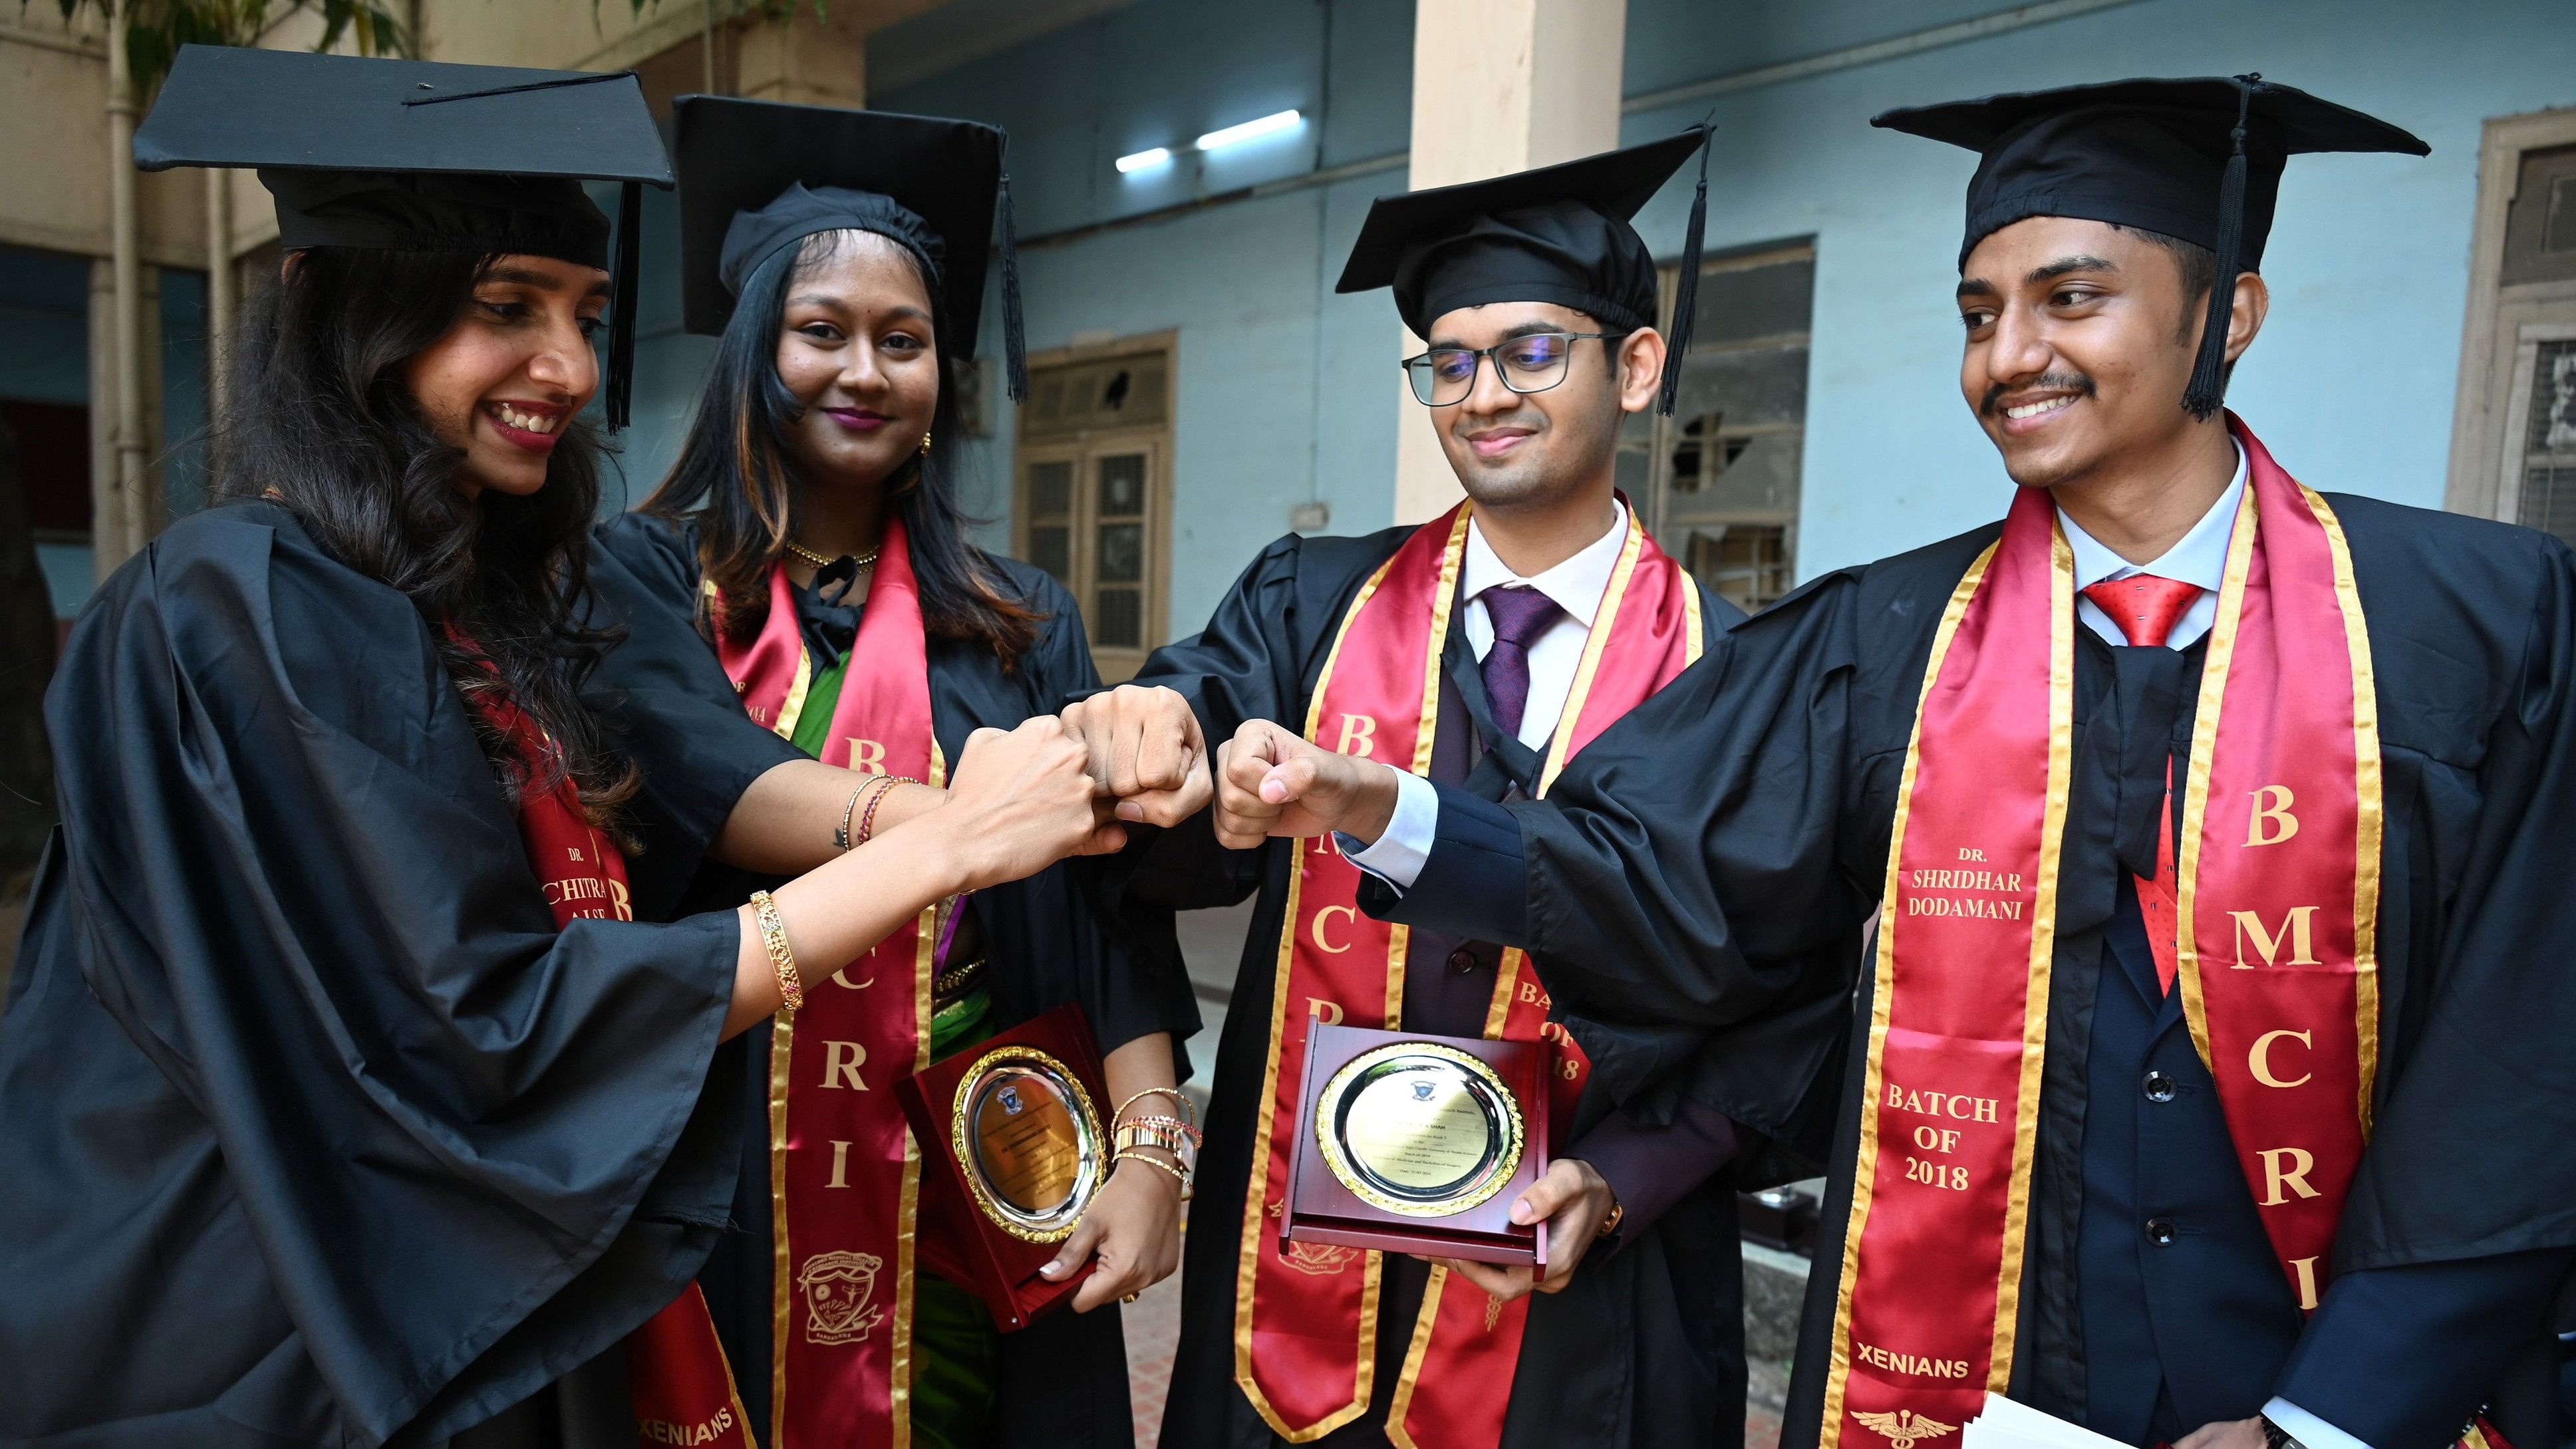 <div class="paragraphs"><p>(L-R) Chitra Alseis, recipient of RGUHS gold medal for scoring highest in Pharmacology; Chadranana Sahoo, third rank in RGUHS; Pratik A Shah, second rank in RGUHS; and Shridhar Doddamani ninth rank in RGUHS during the convocation on Friday. </p></div>